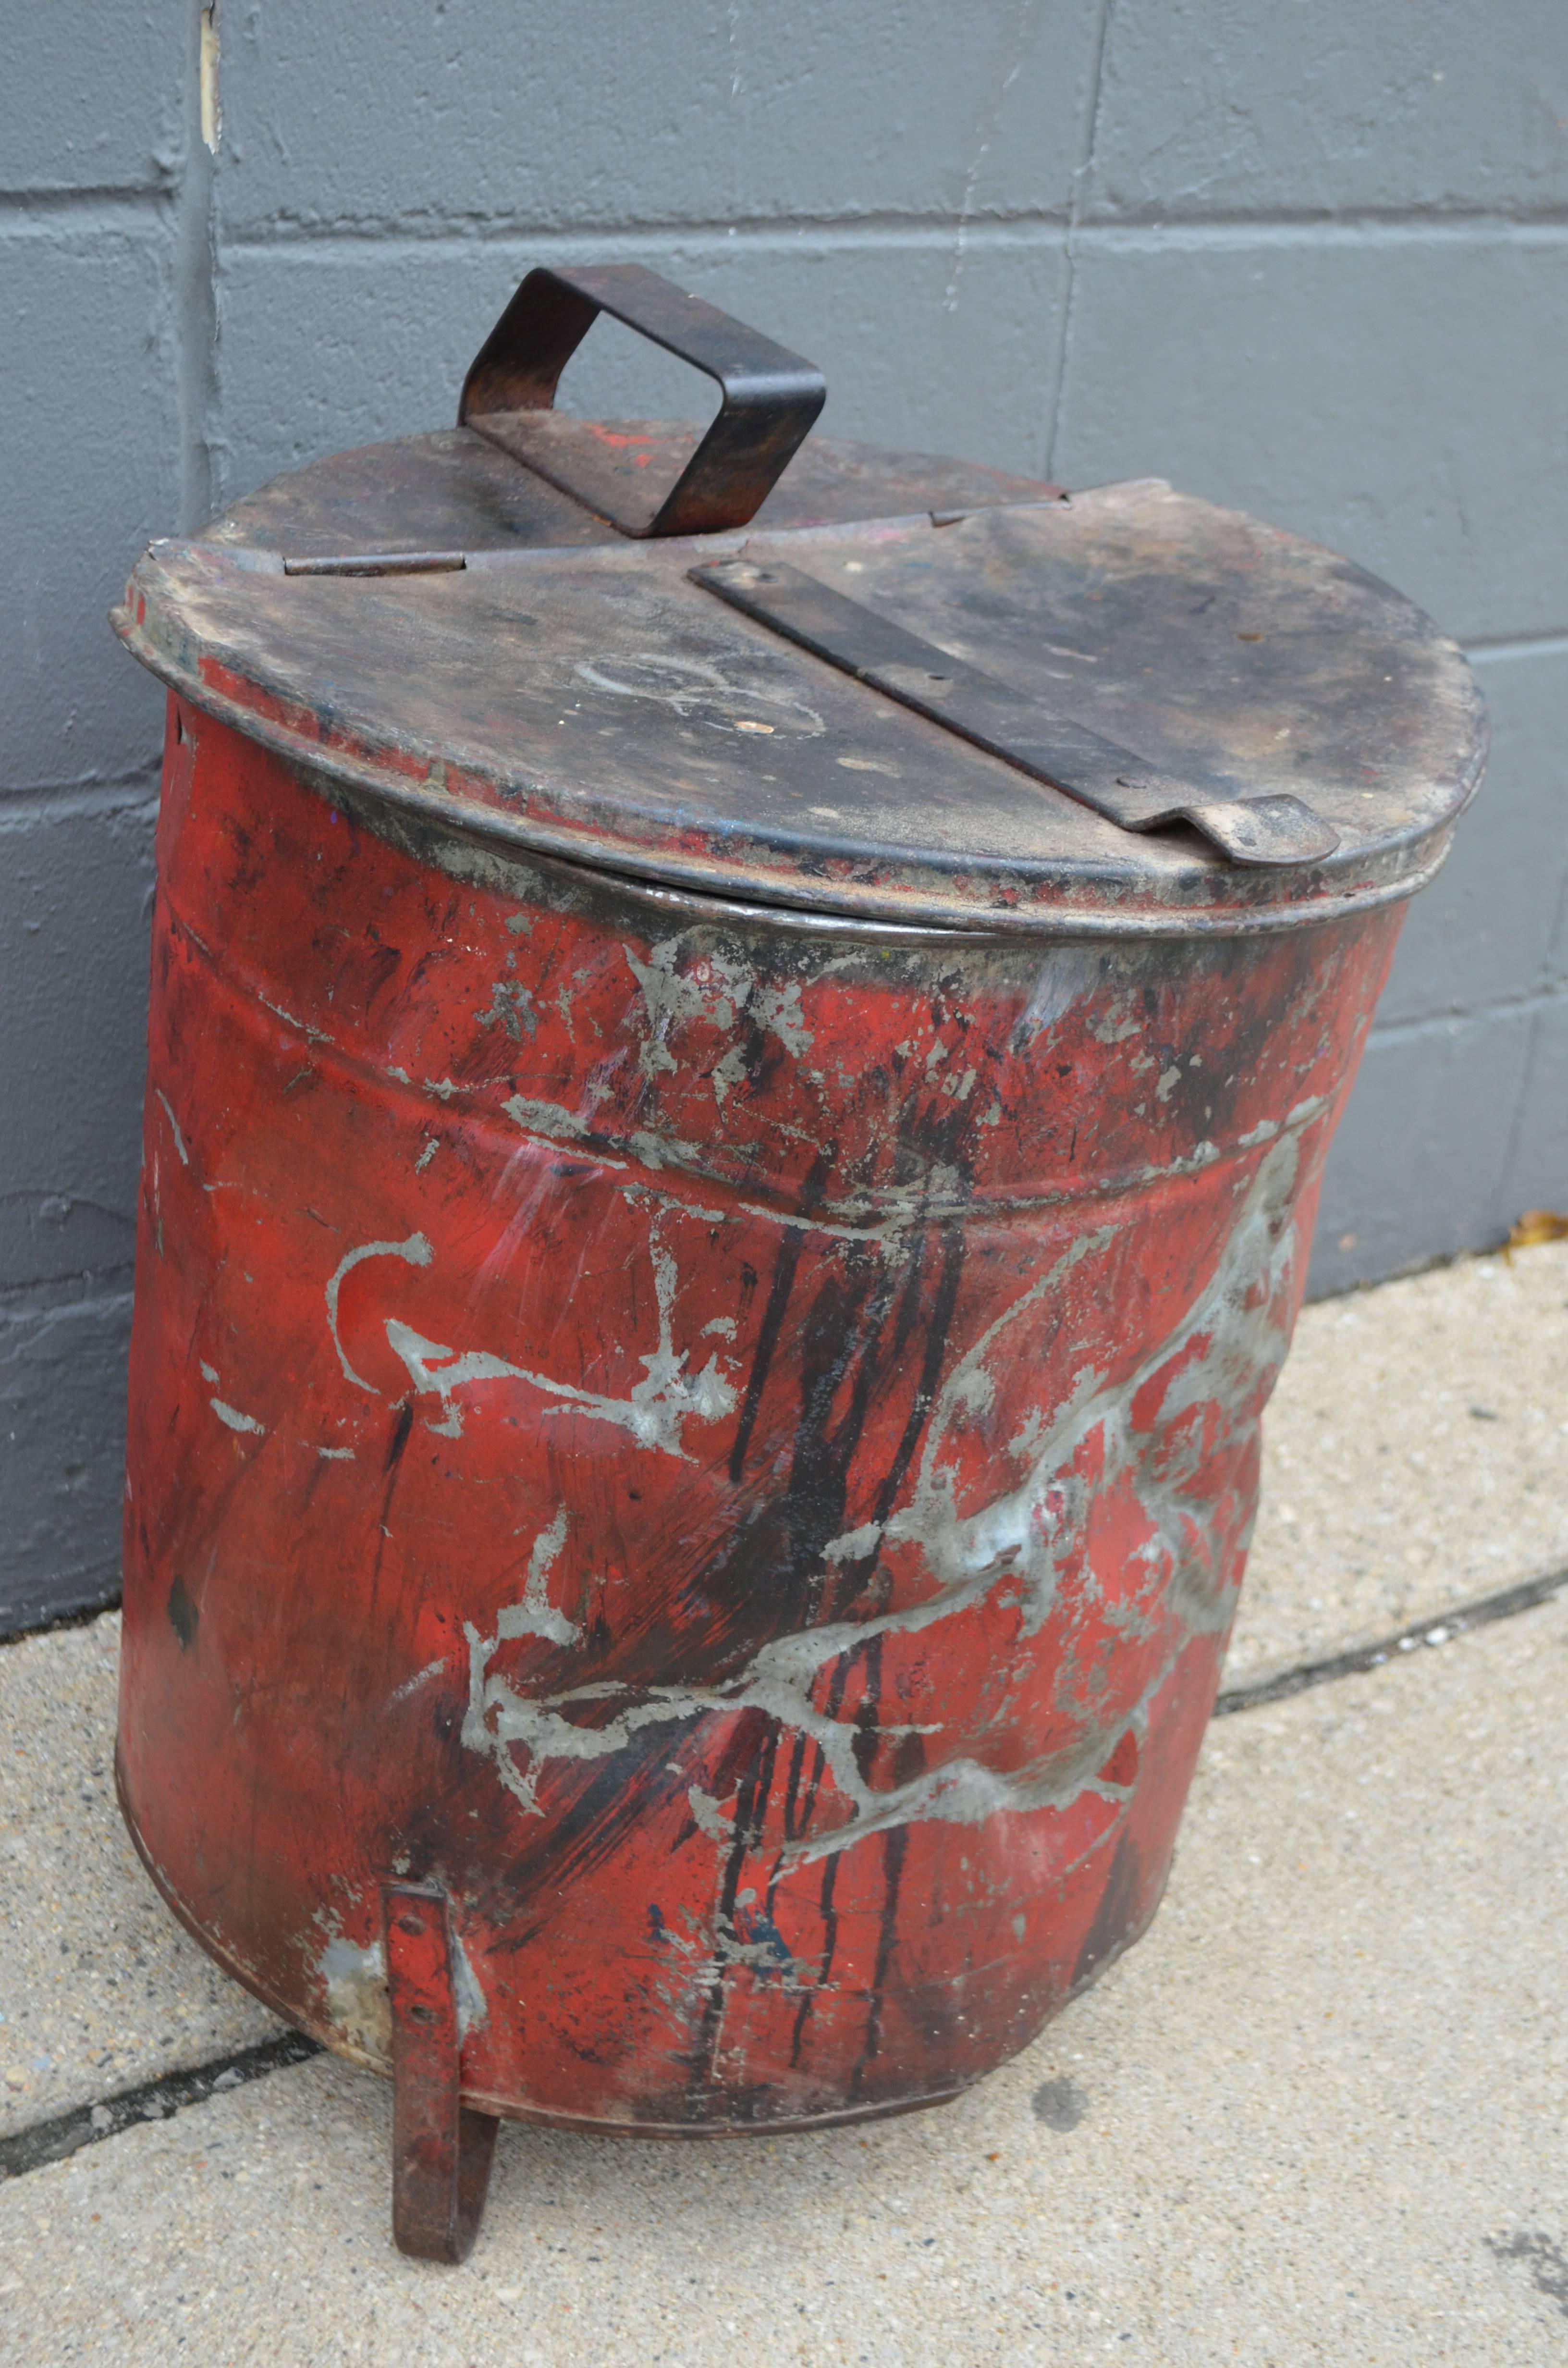 Bathroom bucket from Industrial rag bin with hinged lid. Cleaned and sealed. Wonderful red color with topography of dents. Indestructible with well-earned working-class character.